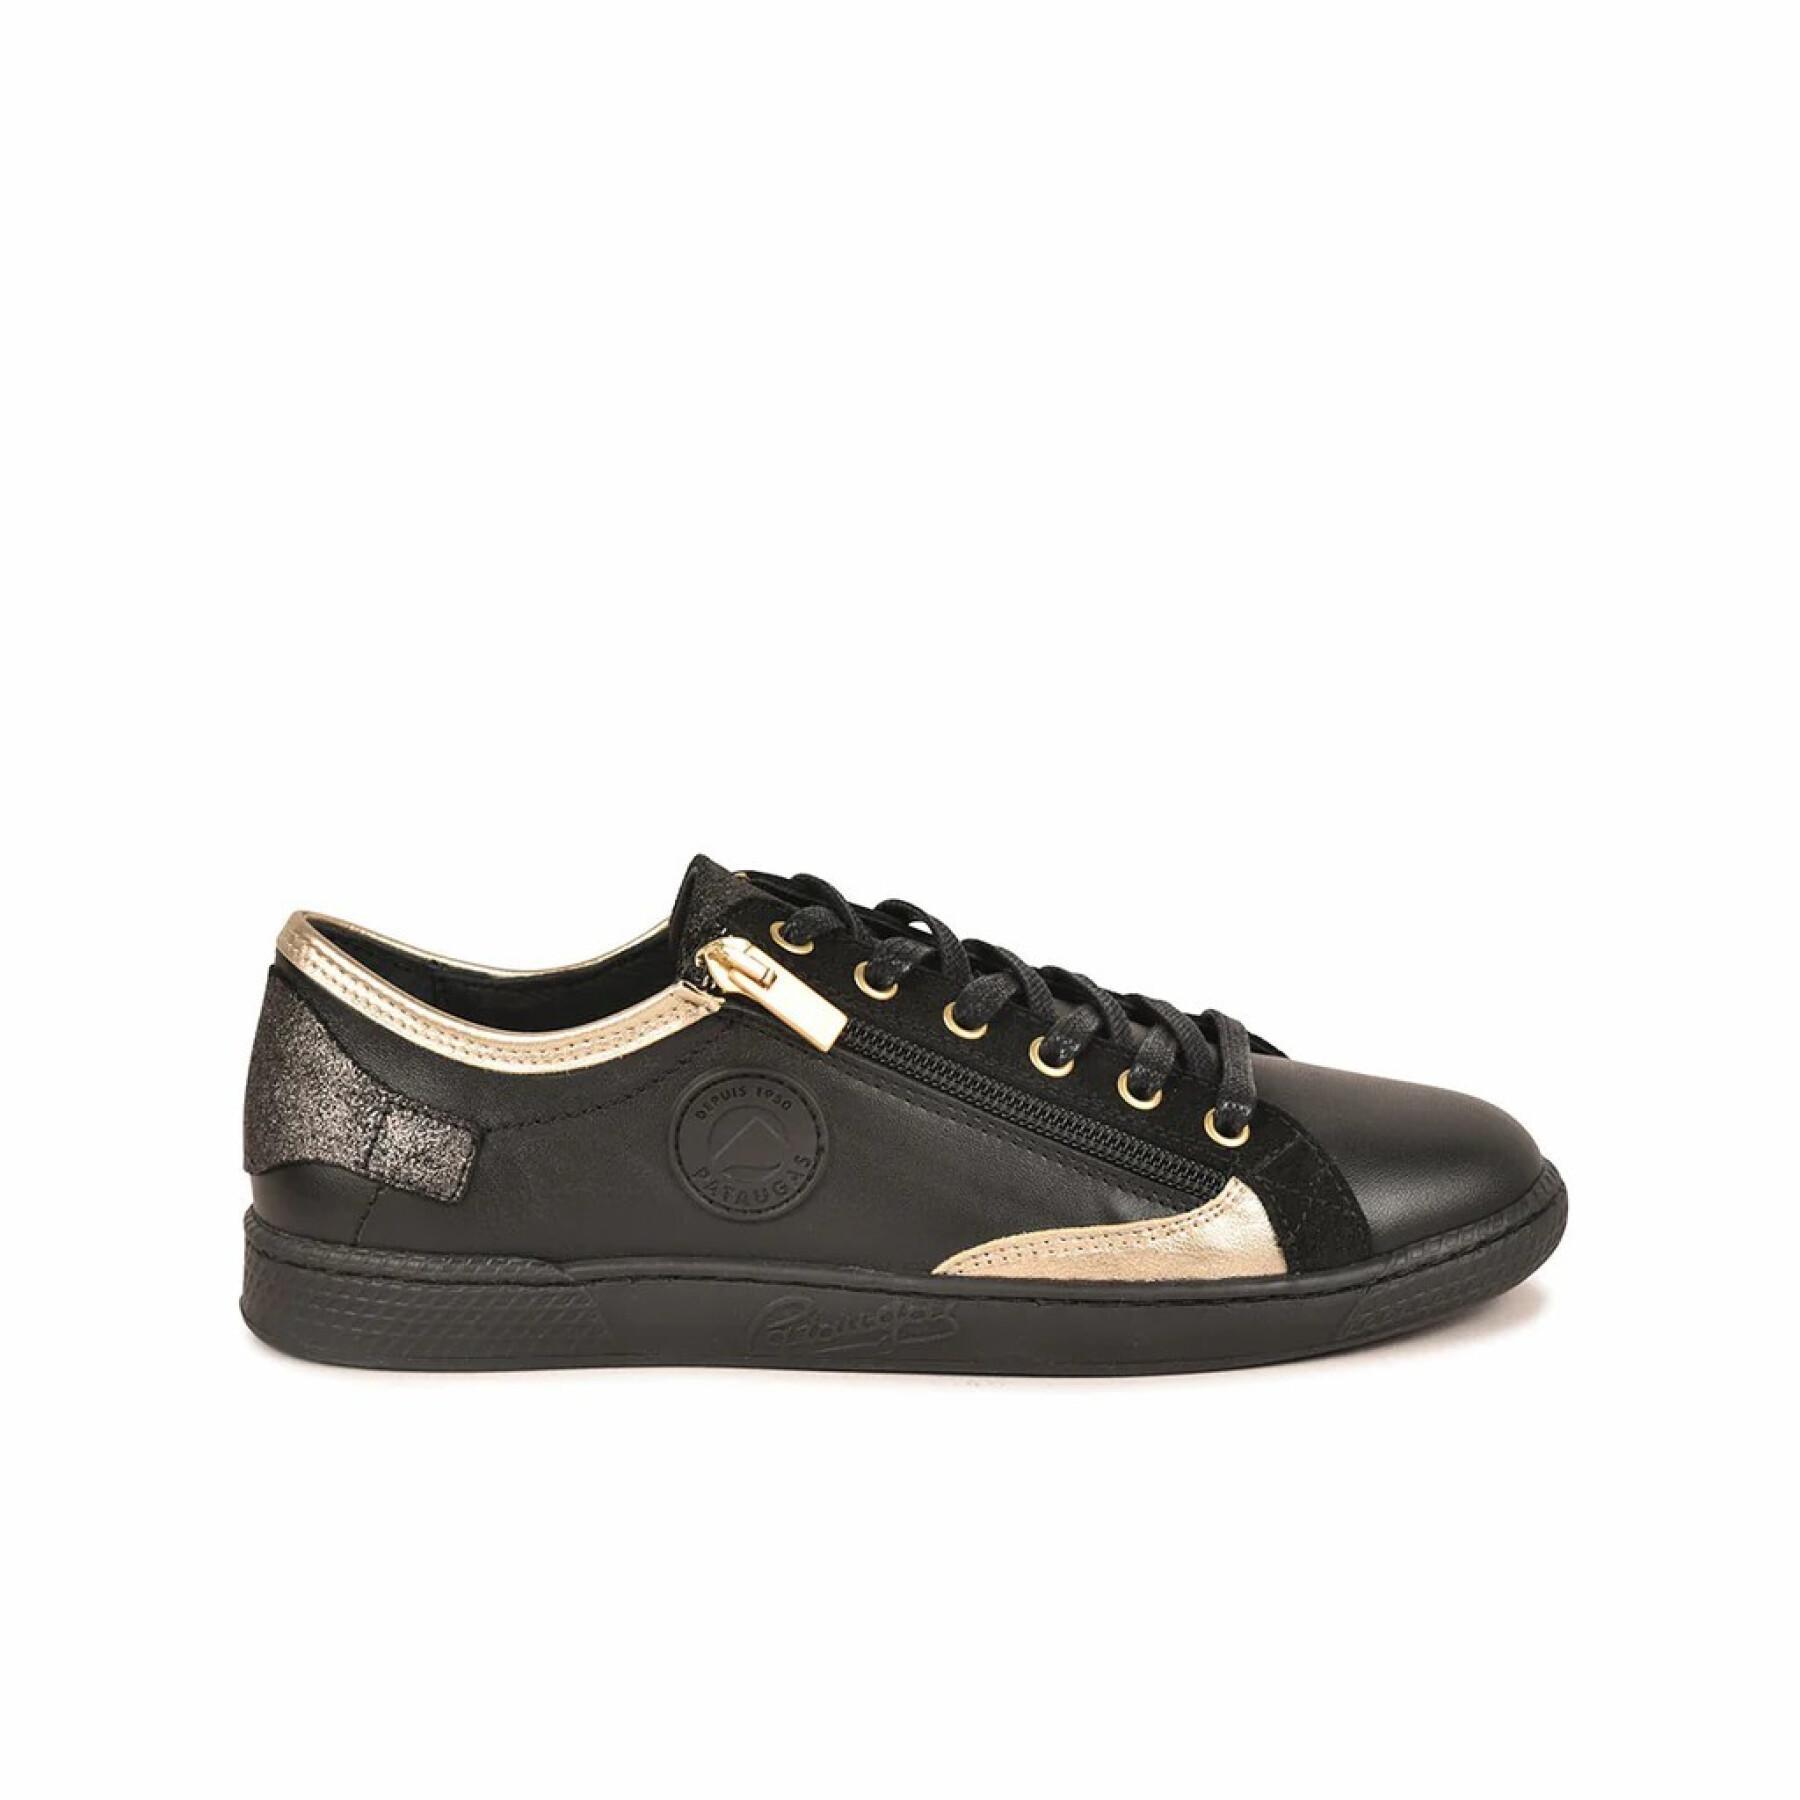 Women's sneakers Pataugas Jester/MIX F4I